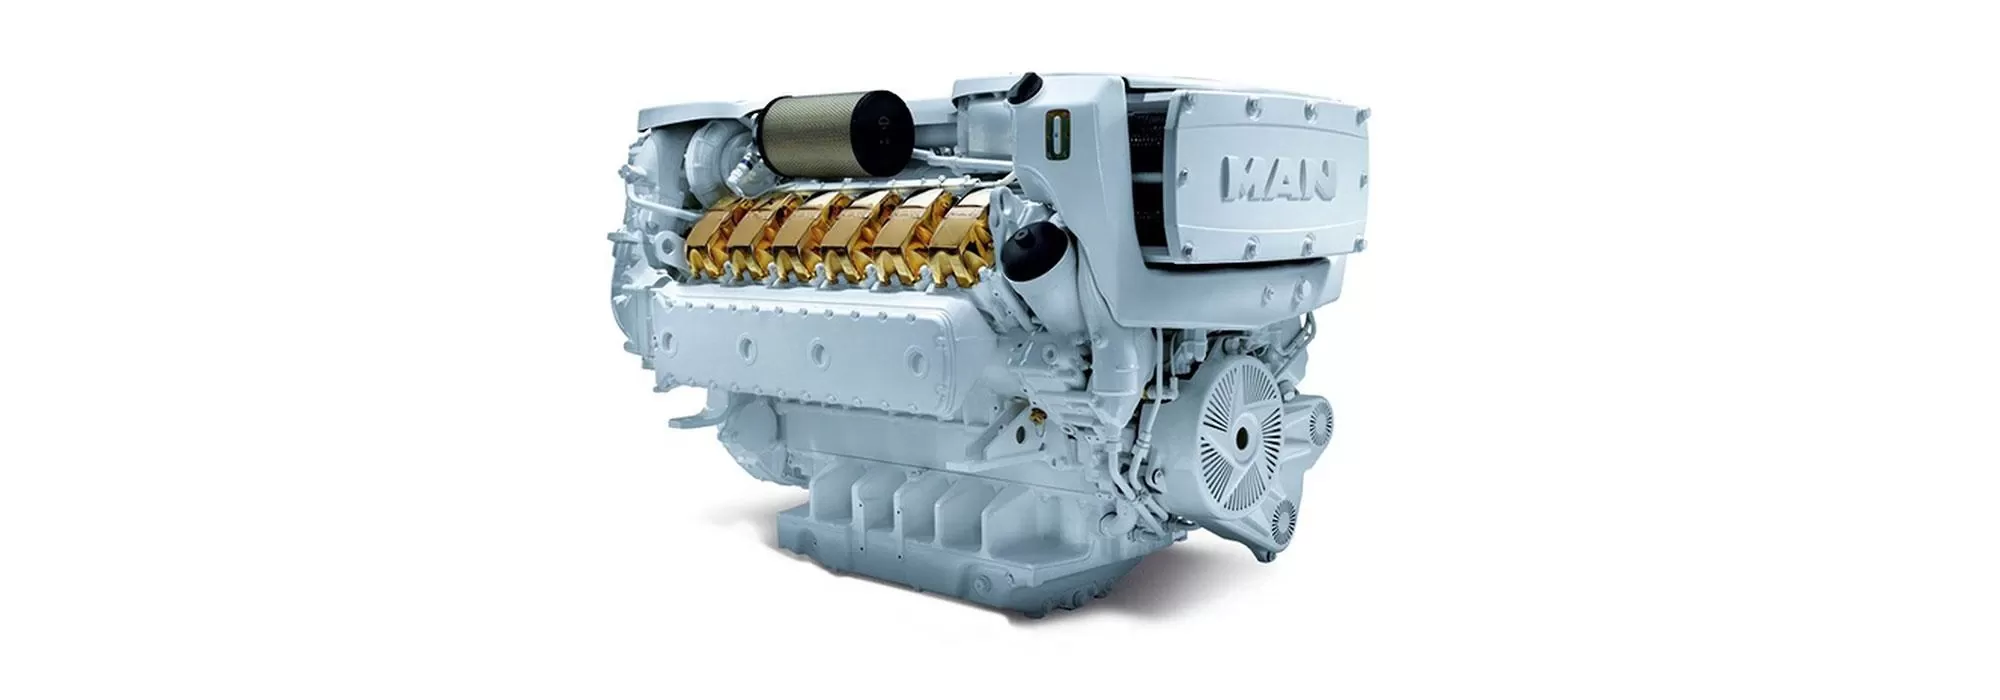 MAN engines yacht are well known for their compact dimensions and thus give architects and boat-builders a good deal of room for manoeuvre